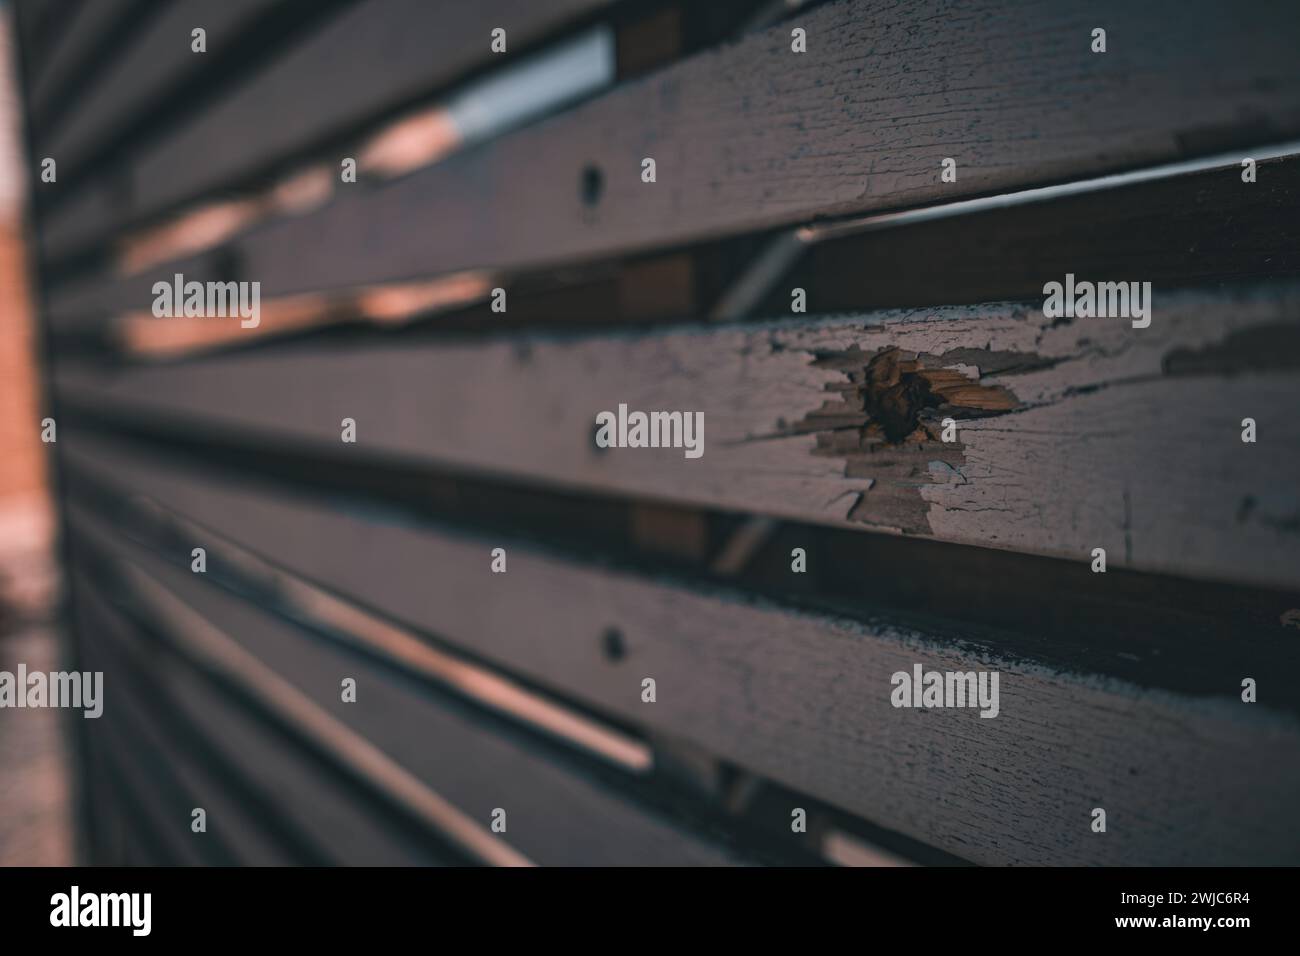 Close-up of a wooden fence in a Sderot neighborhood pockmarked with bullet holes, silent witness to the recent conflict. Stock Photo